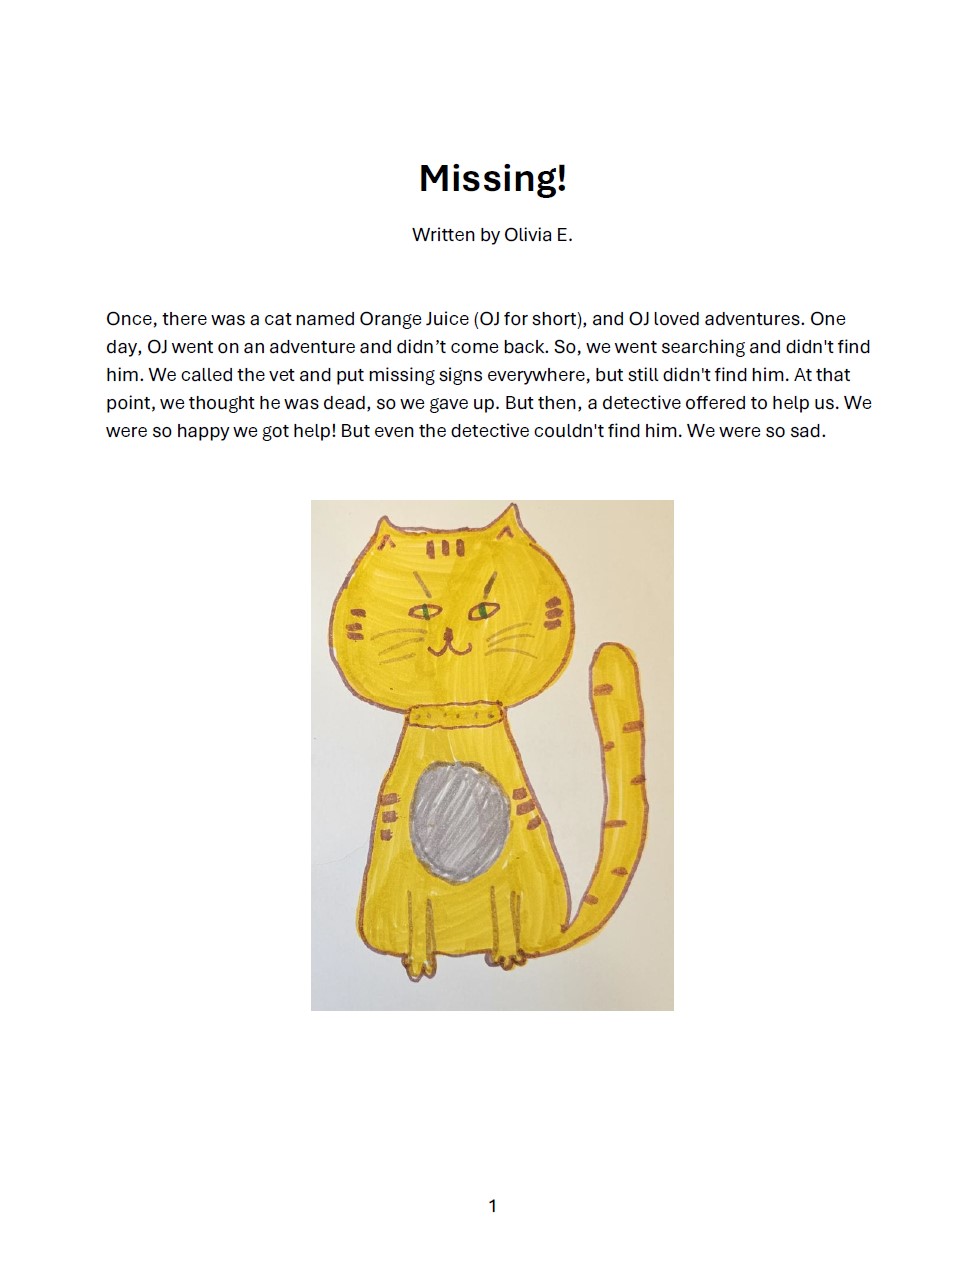 Missing! by Olivia E.